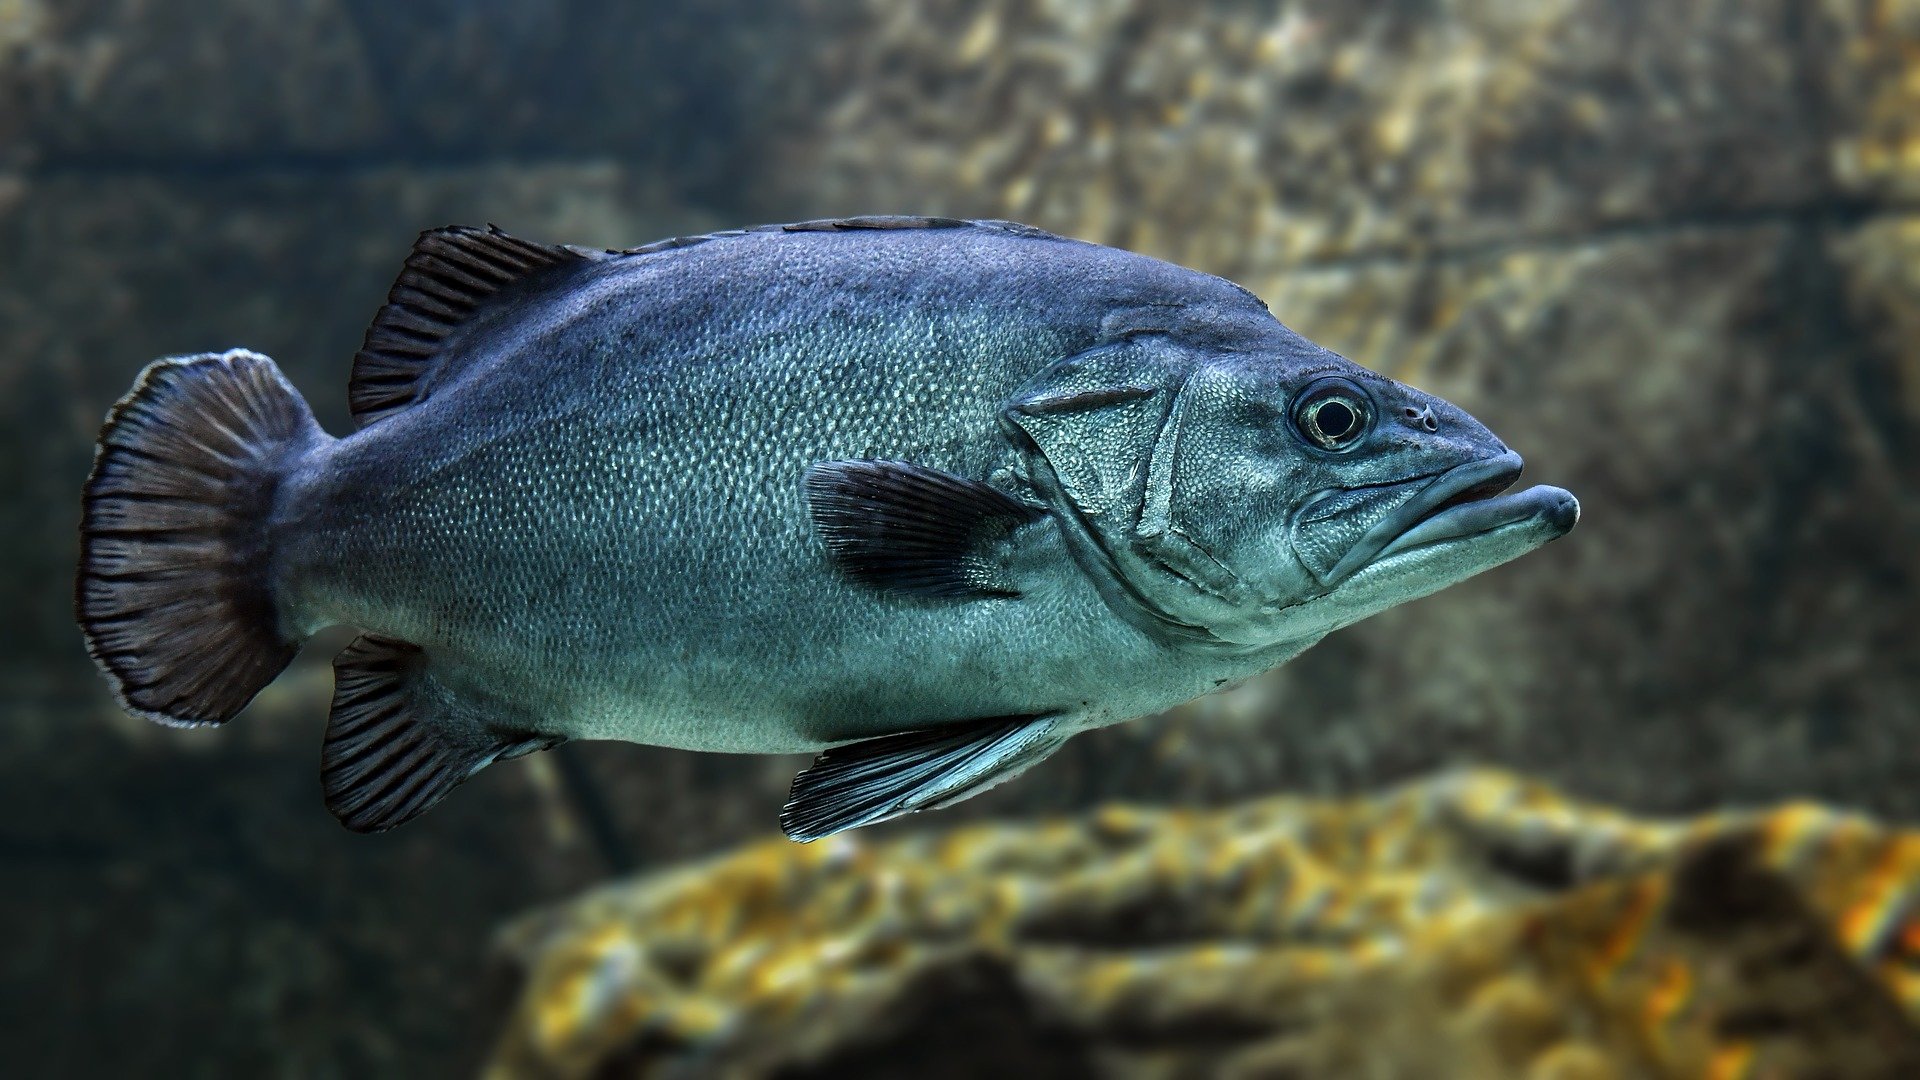 Why some fish are 'junk' and others are protected. Study points to